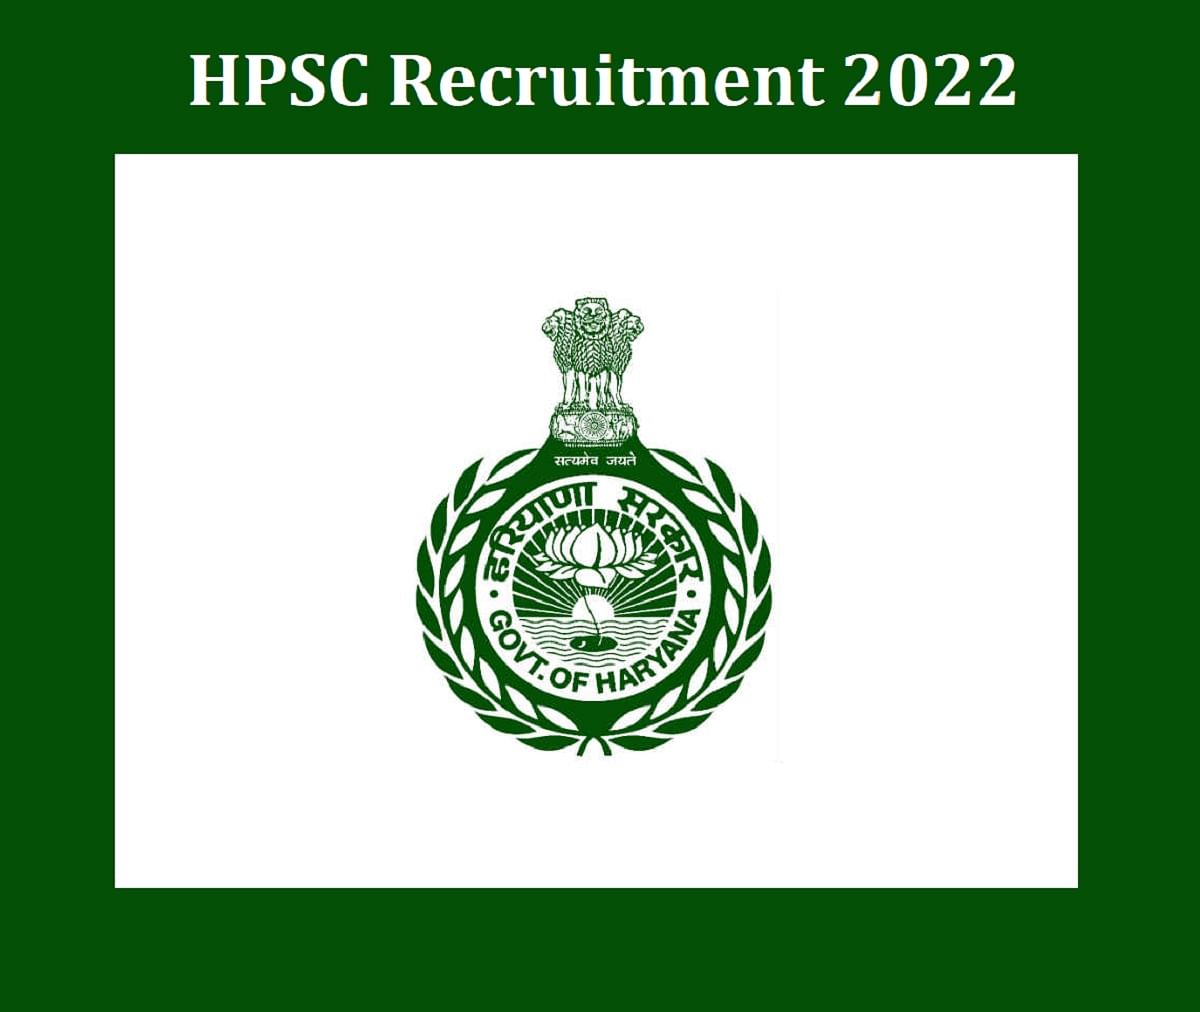 HPSC ADO recruitment 2022: Application Window Closes today for 700 Agricultural Development Officer posts